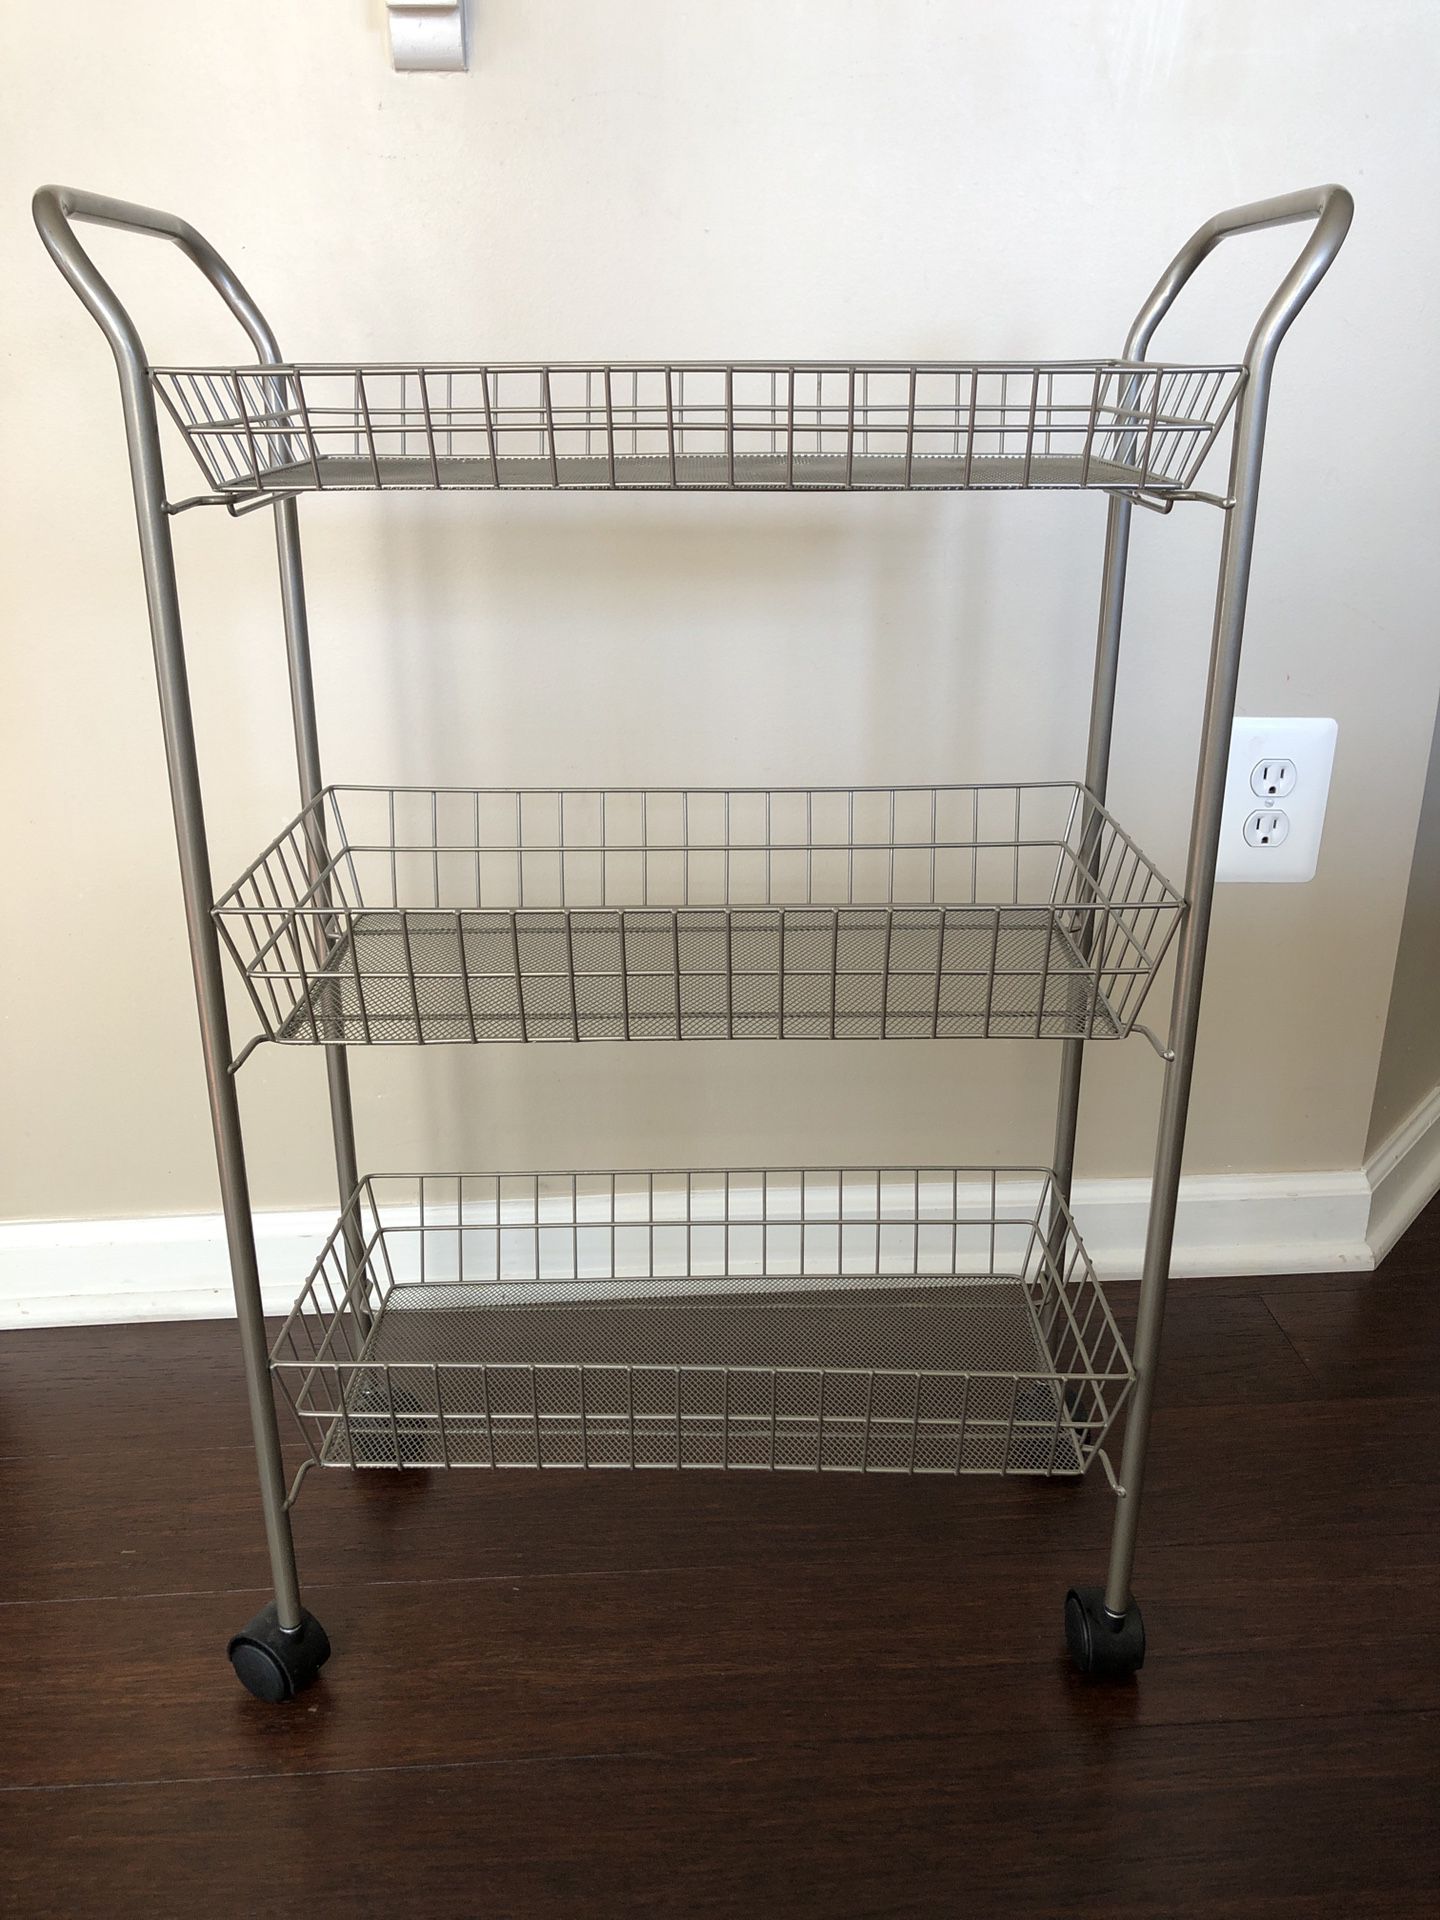 3-Tier Rolling Metal Storage Organizer - Mobile Utility Cart with Caster Wheels,